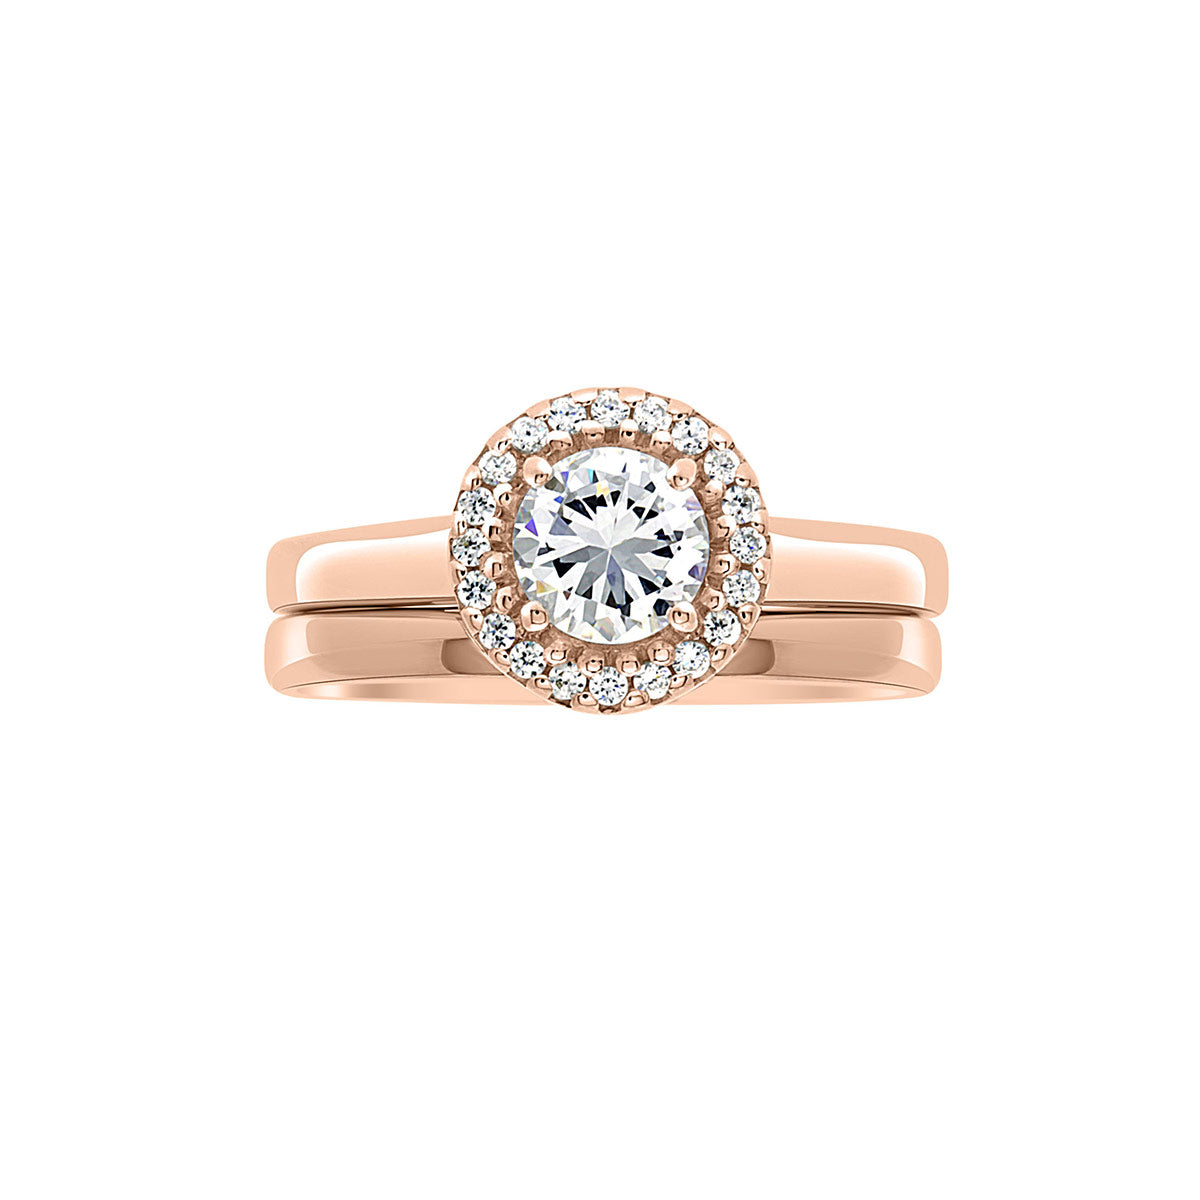 Round Vintage Engagement Ring in rose gold,  a horizontal position against a white background. with a matching plain wedding ring